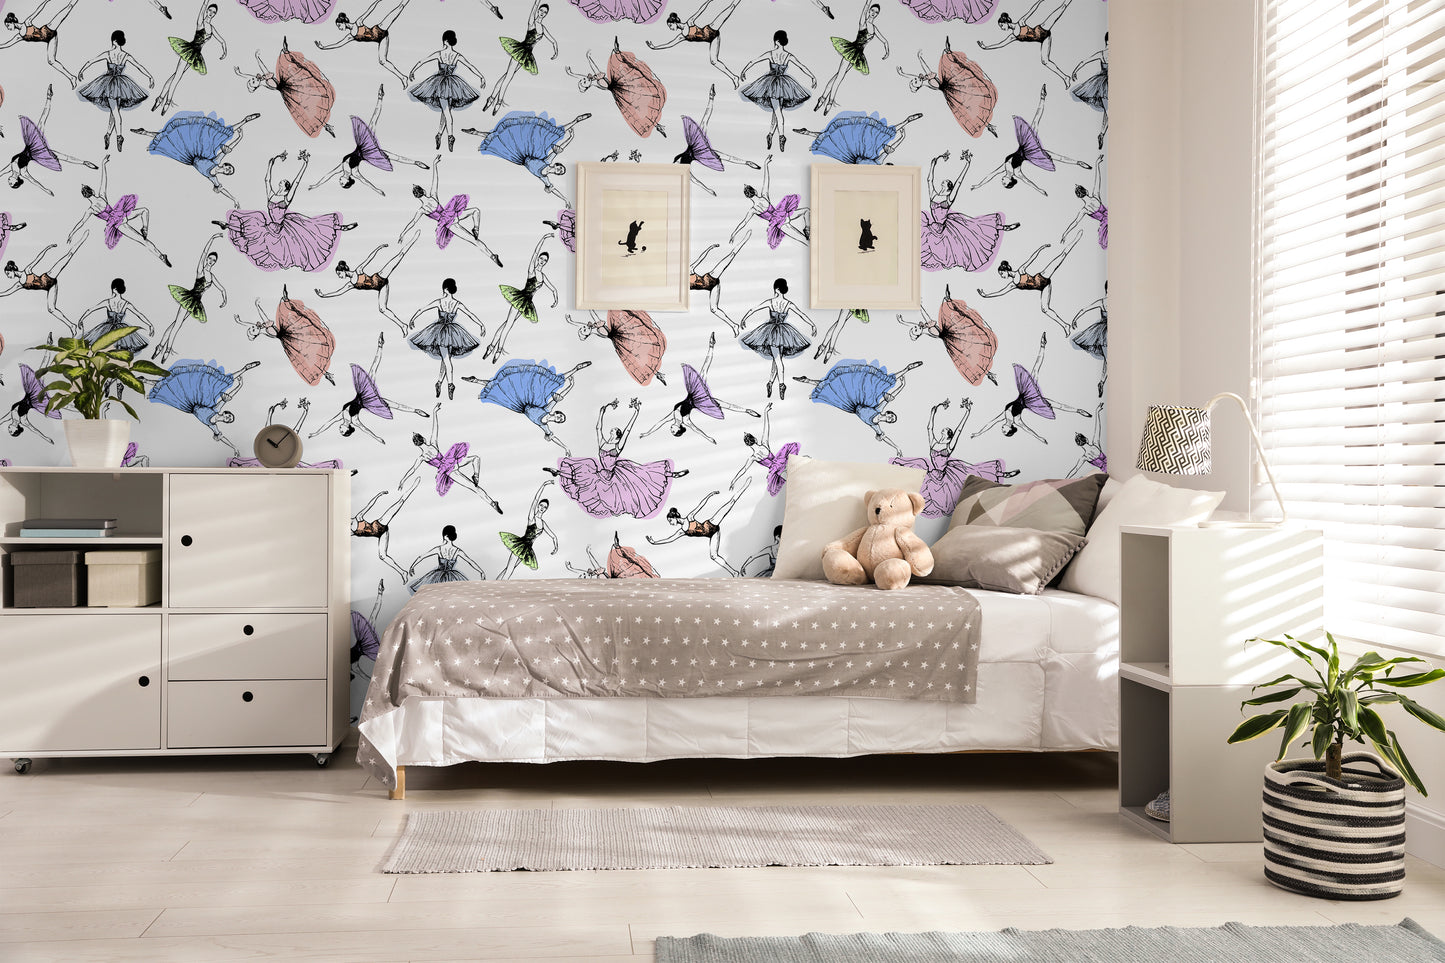 Twinkle Toes Ballerina Removable Peel And Stick Wallpaper